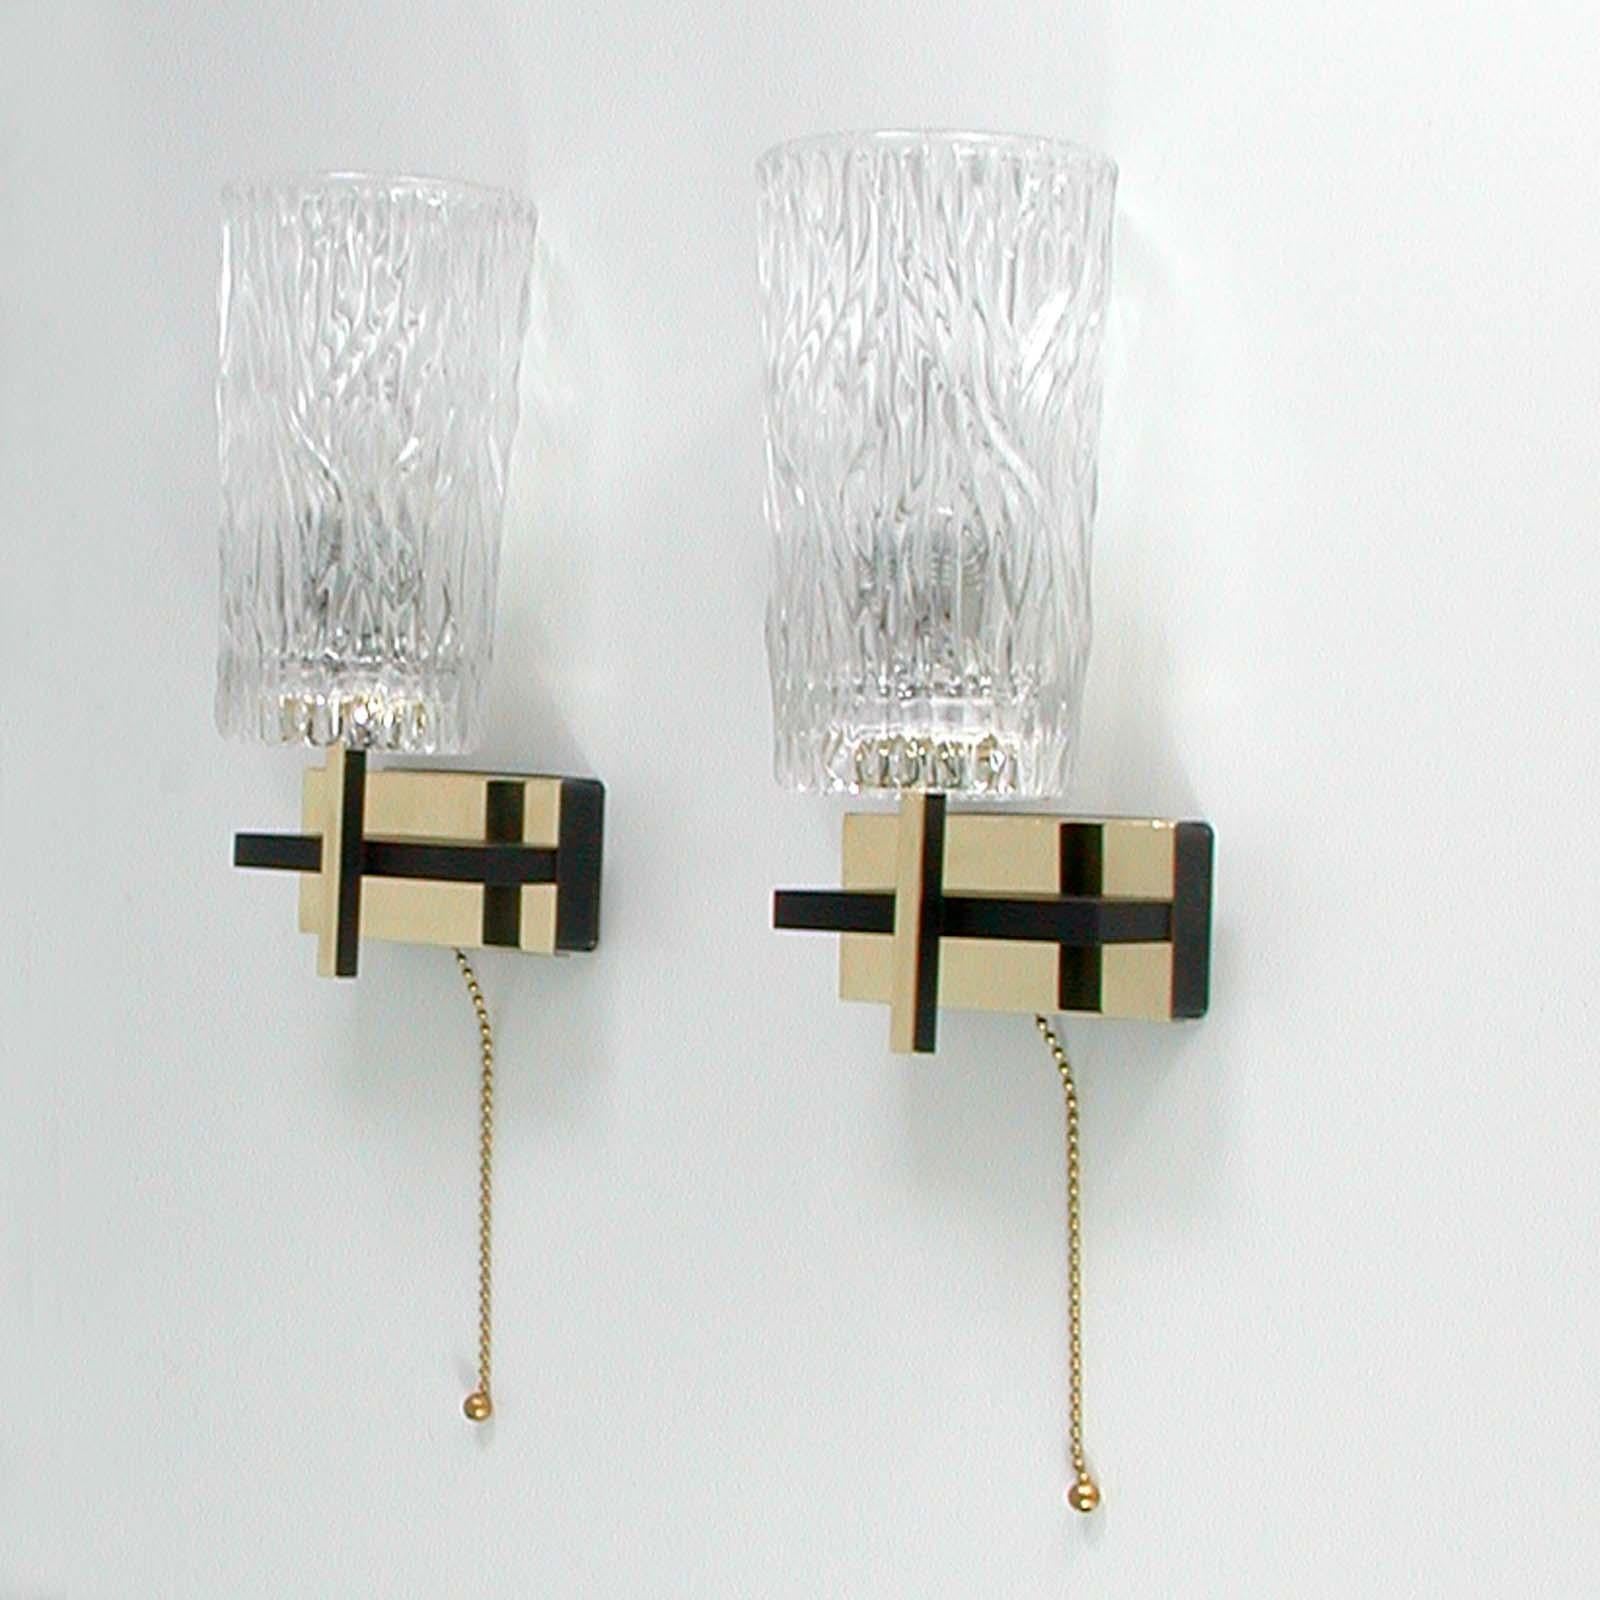 Midcentury French Brass and Textured Glass Sconces by Maison Arlus, 1950s For Sale 1